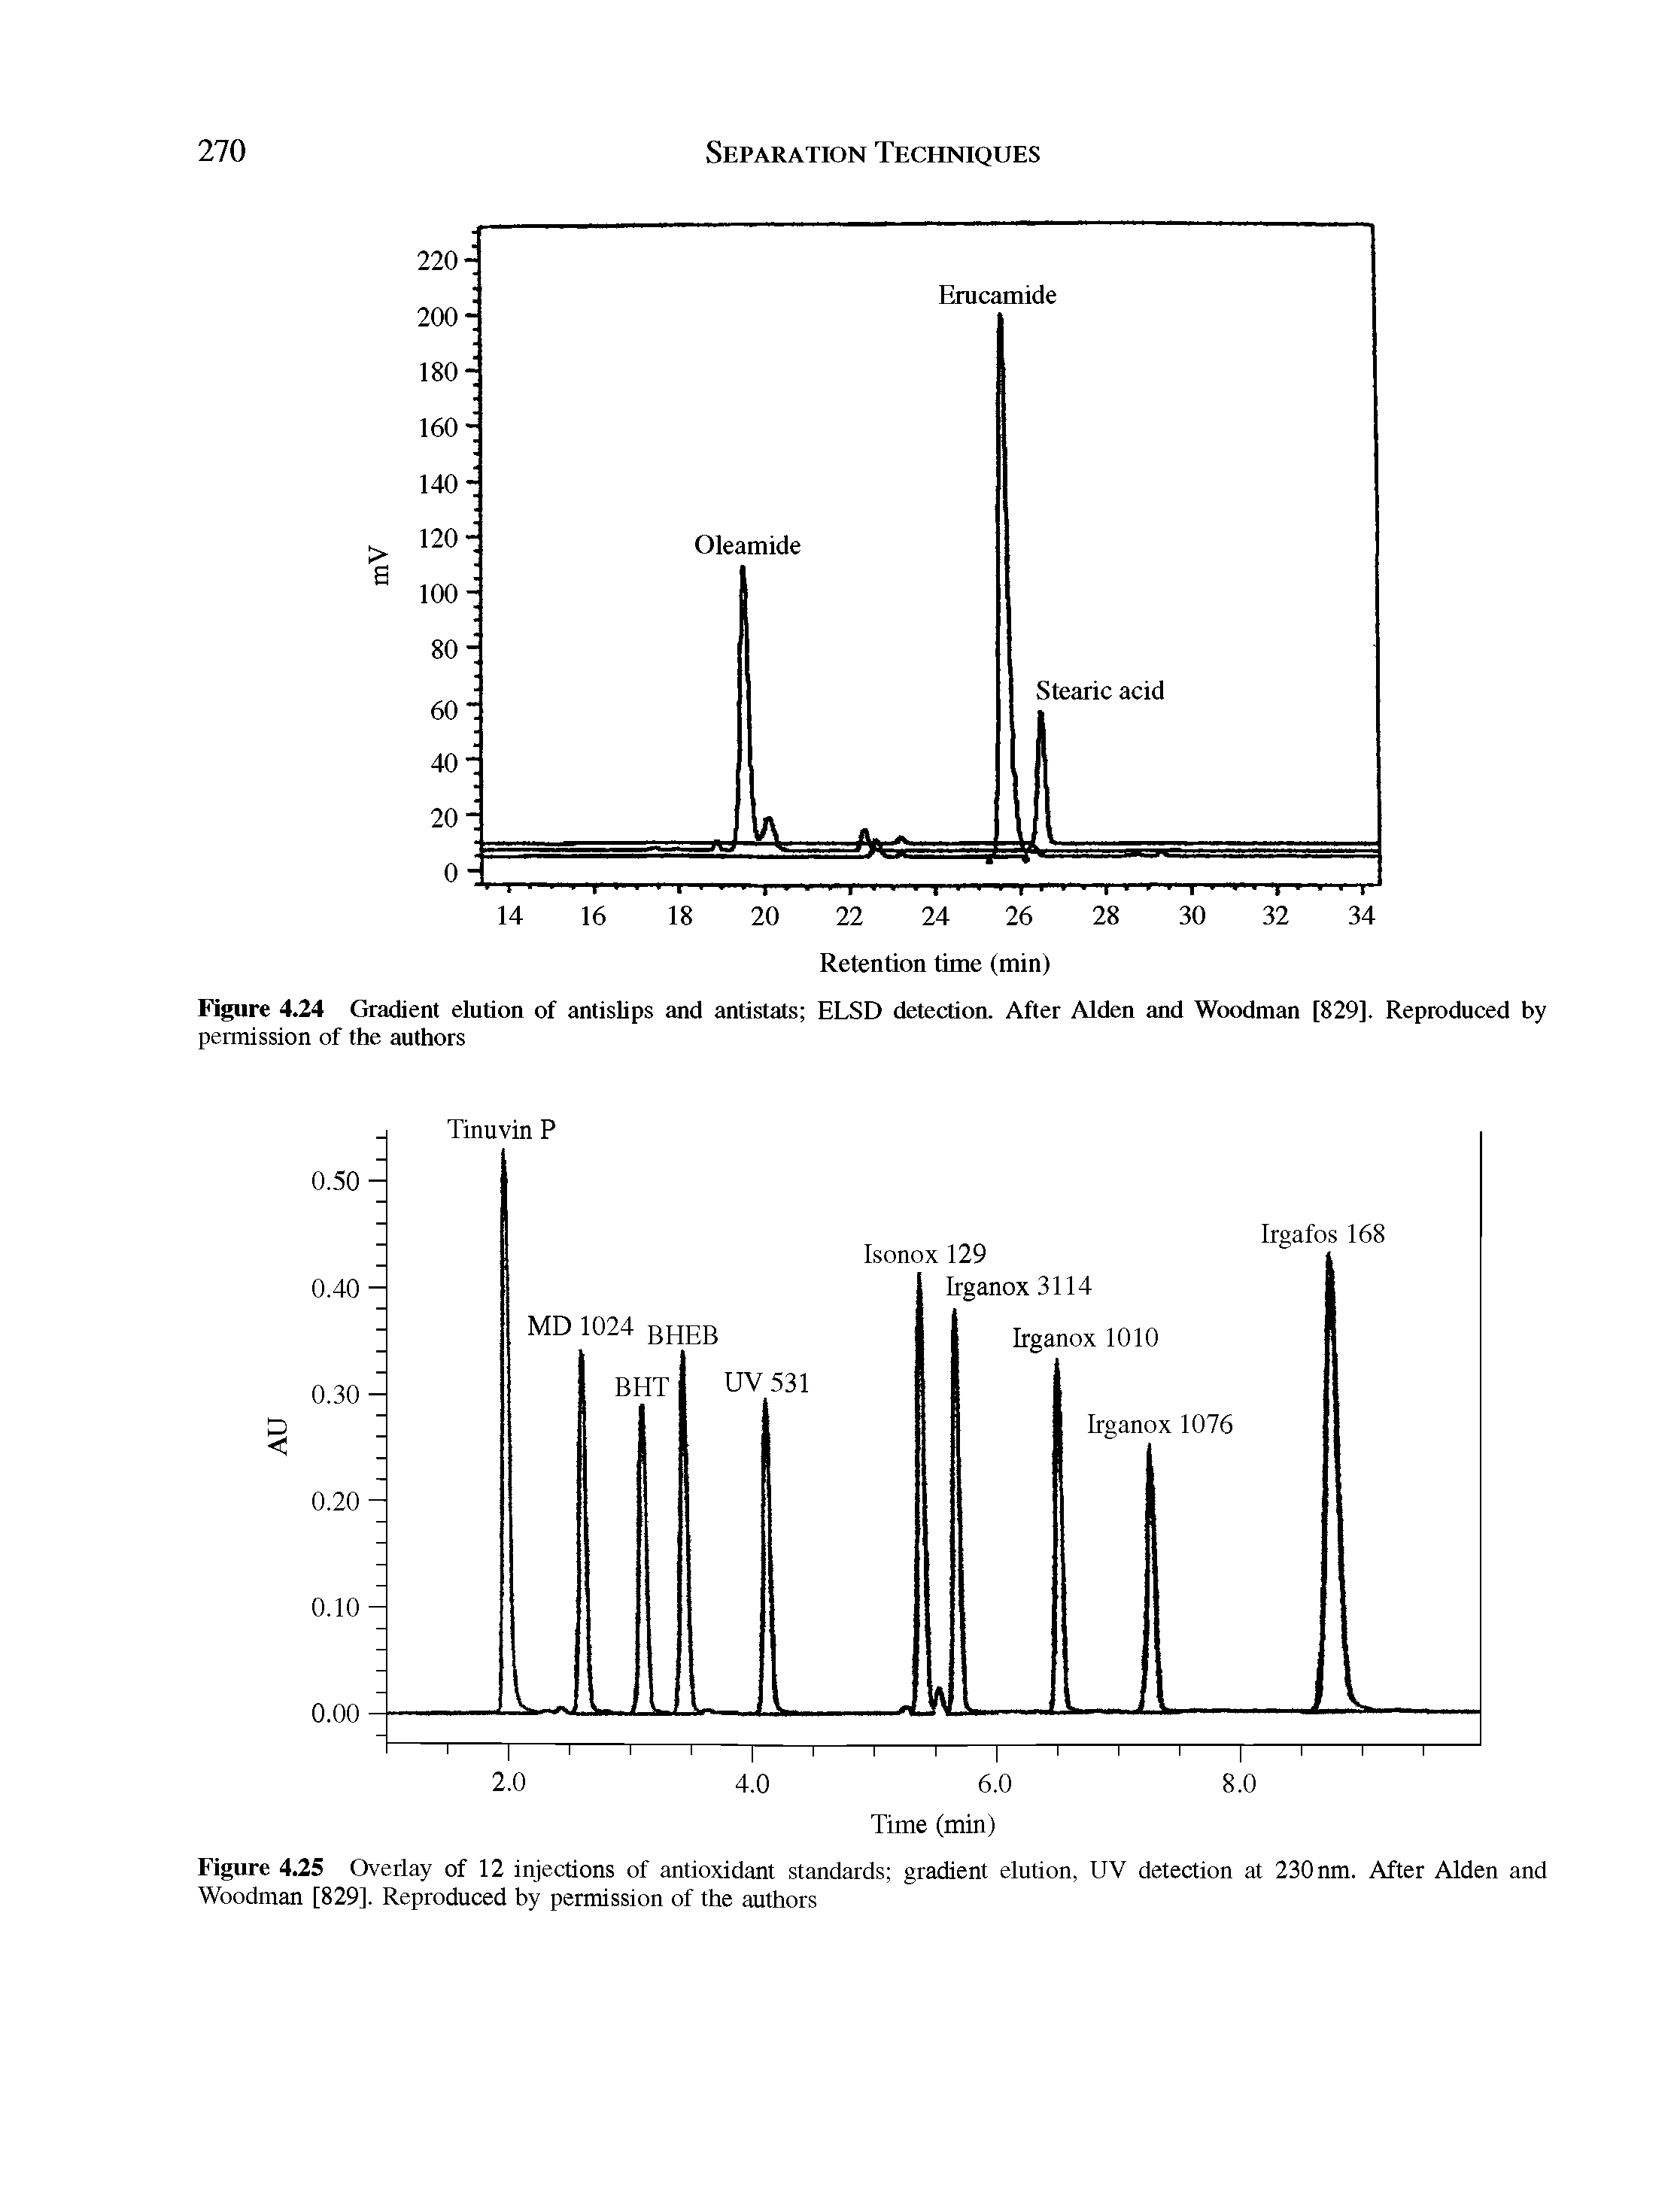 Figure 4.24 Gradient elution of antislips and antistats ELSD detection. After Alden and Woodman [829]. Reproduced by permission of the authors...